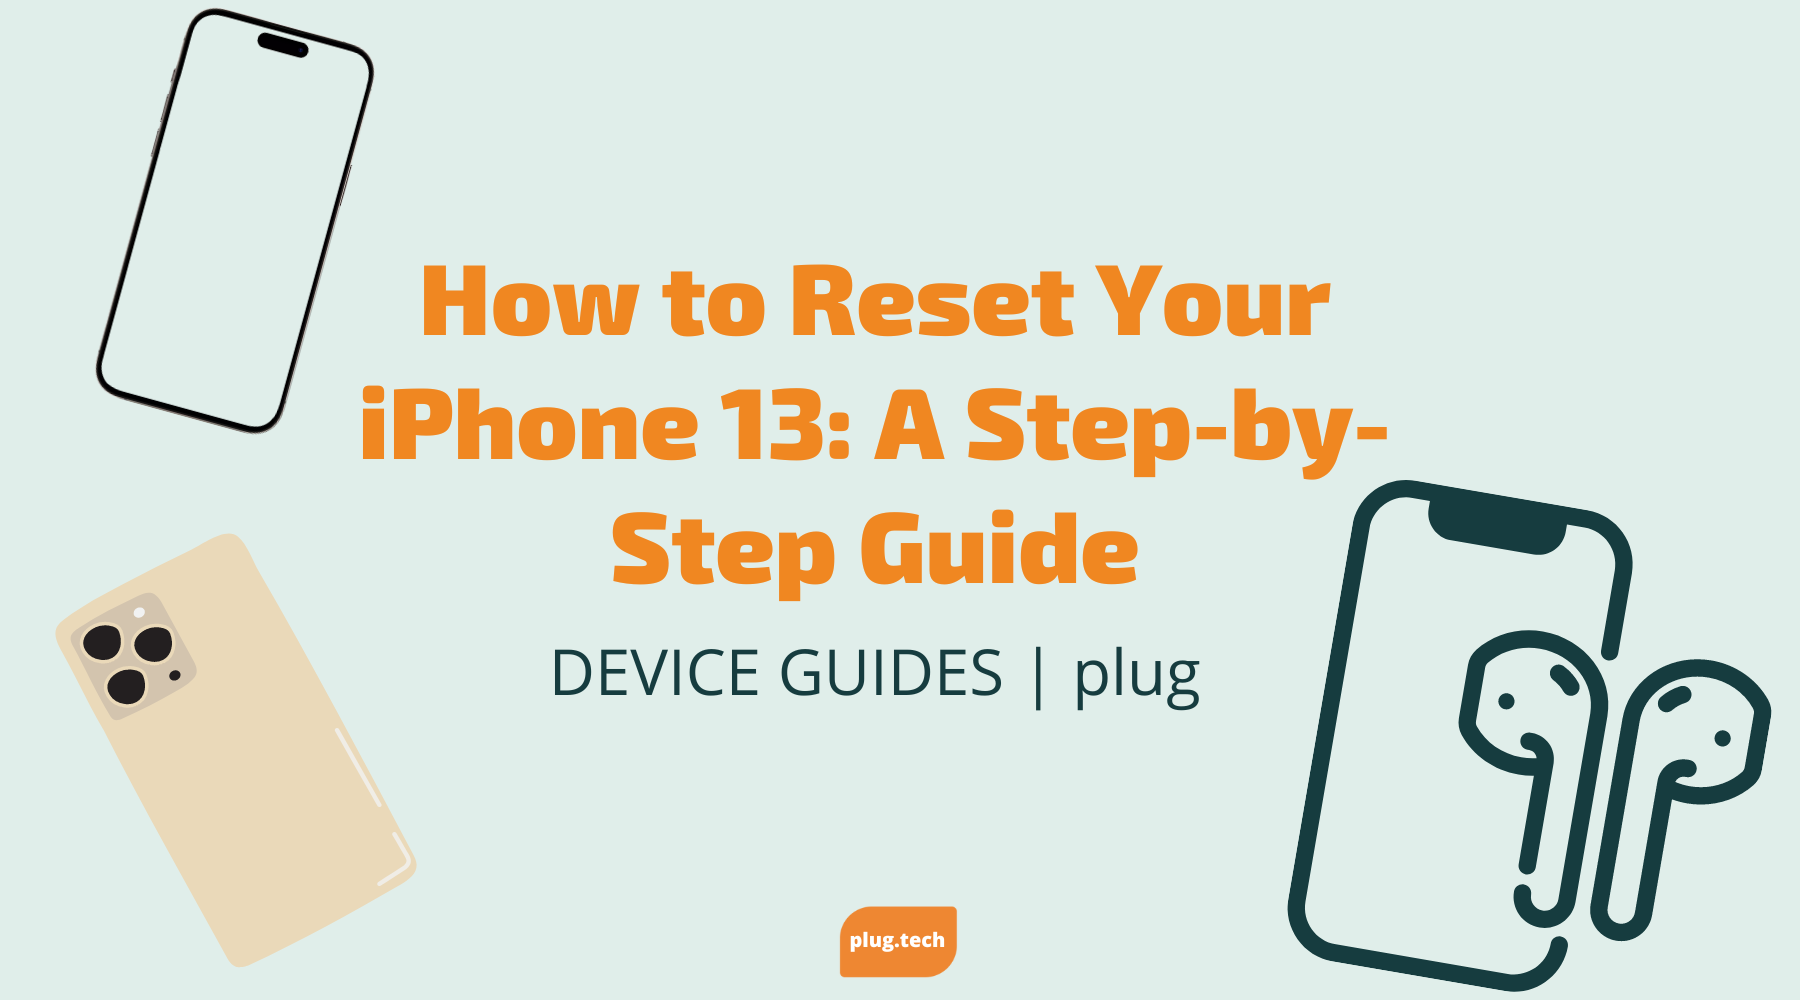 How to Reset Your iPhone 13: A Step-by-Step Guide